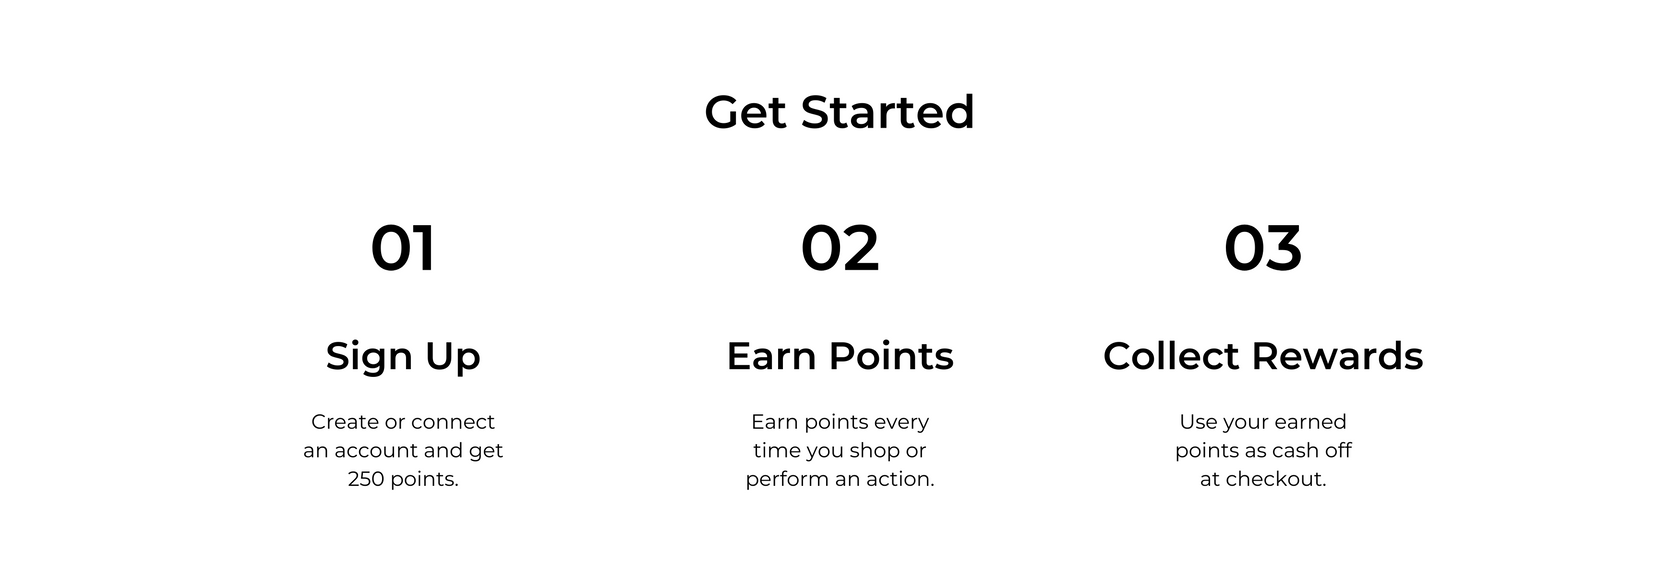 get started: step 1 - sign up and get 250 points automatically. step 2 - earn points when you shop or perform an action. step 3 - redeem earned points as cash off at checkout